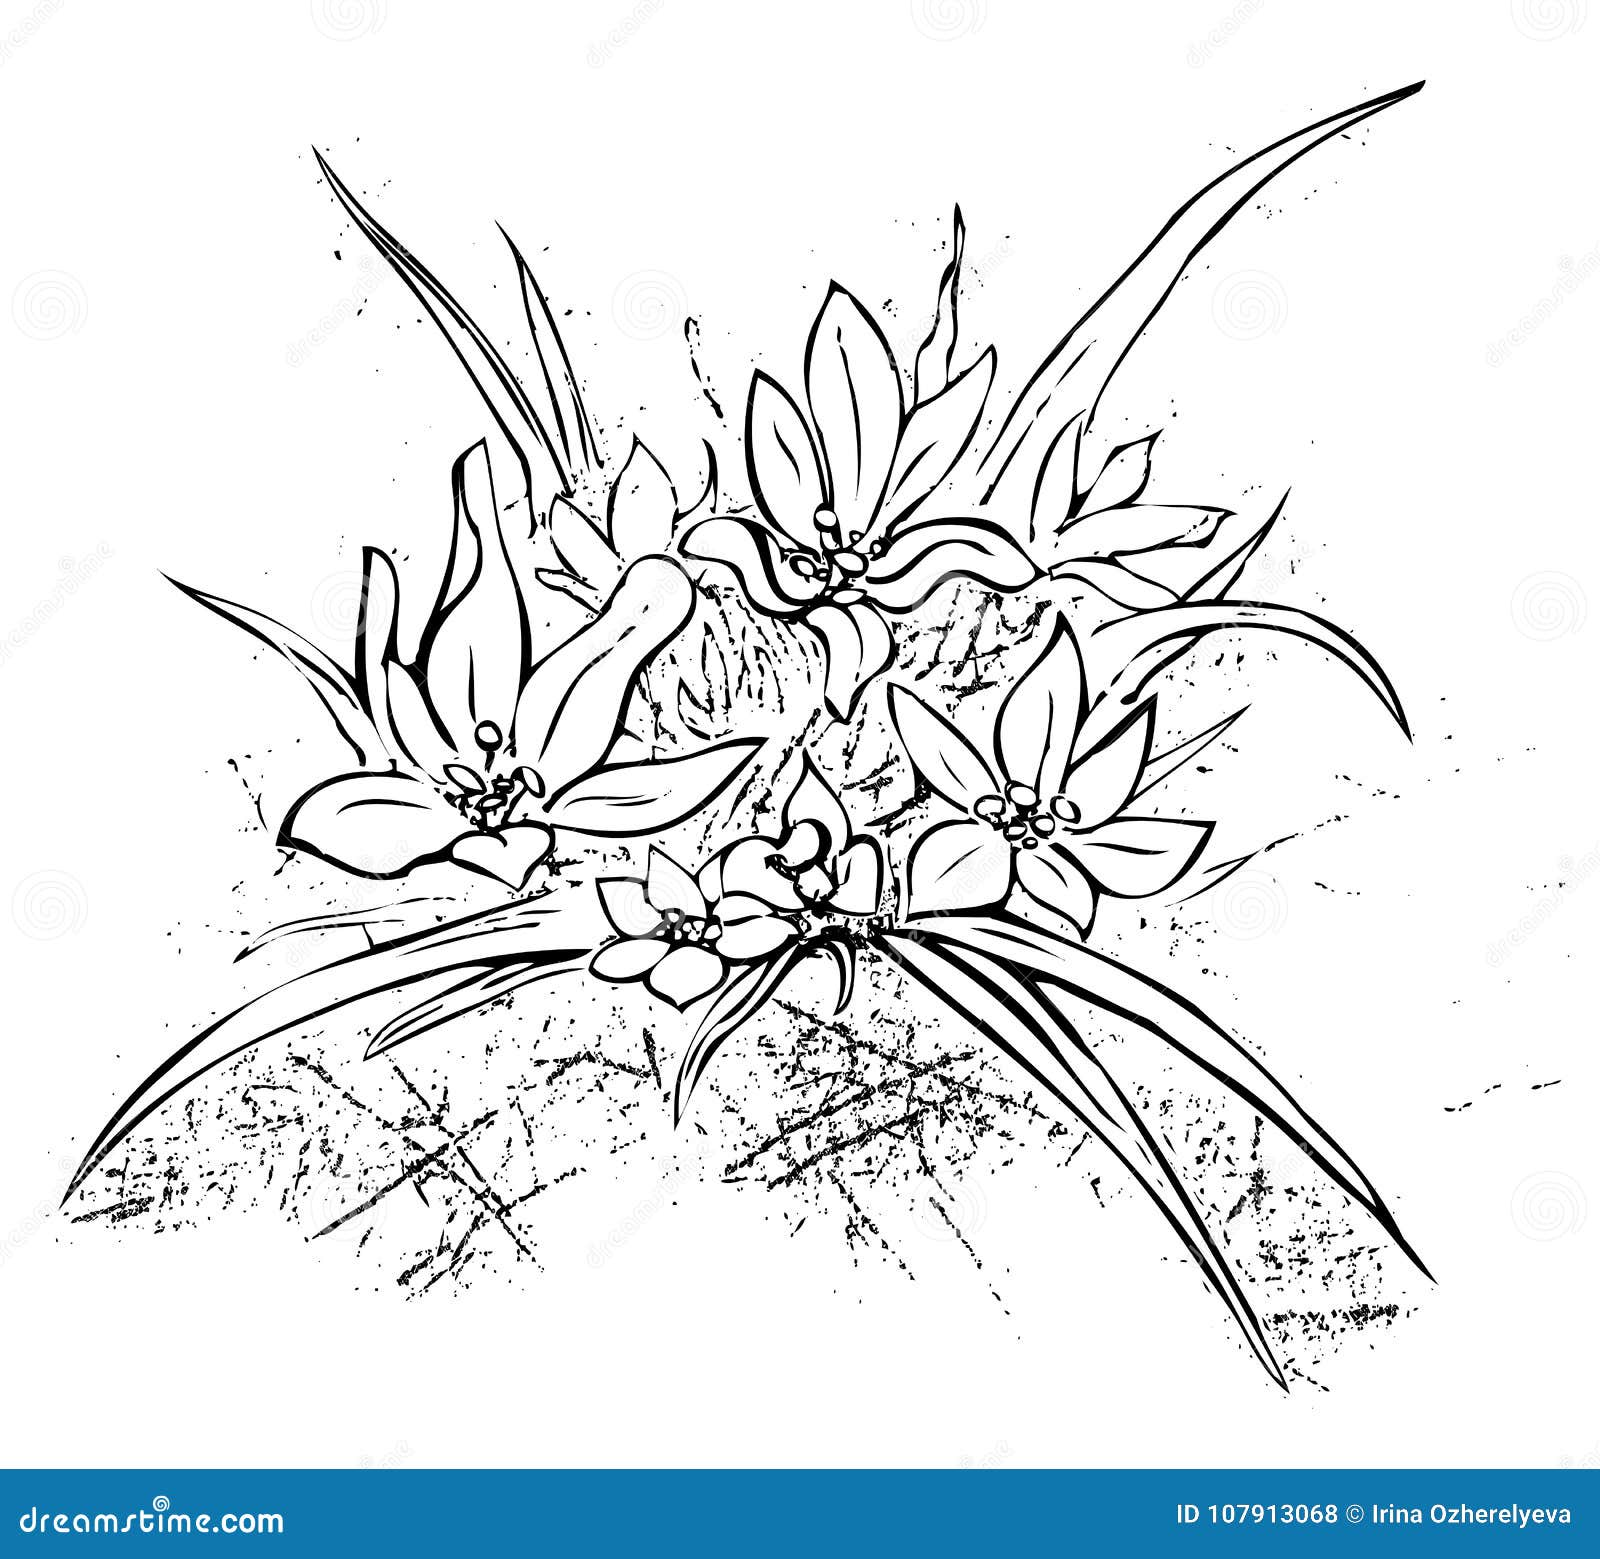 Featured image of post Edelweiss Flower Botanical Drawing Flower art painting art drawings flower art drawing watercolor flowers paintings drawings flower drawing tutorials flower drawing flower prominent illustrator kate kyehyun park is known not only for her beautiful botanical drawings but also for her desire to help others achieve the same